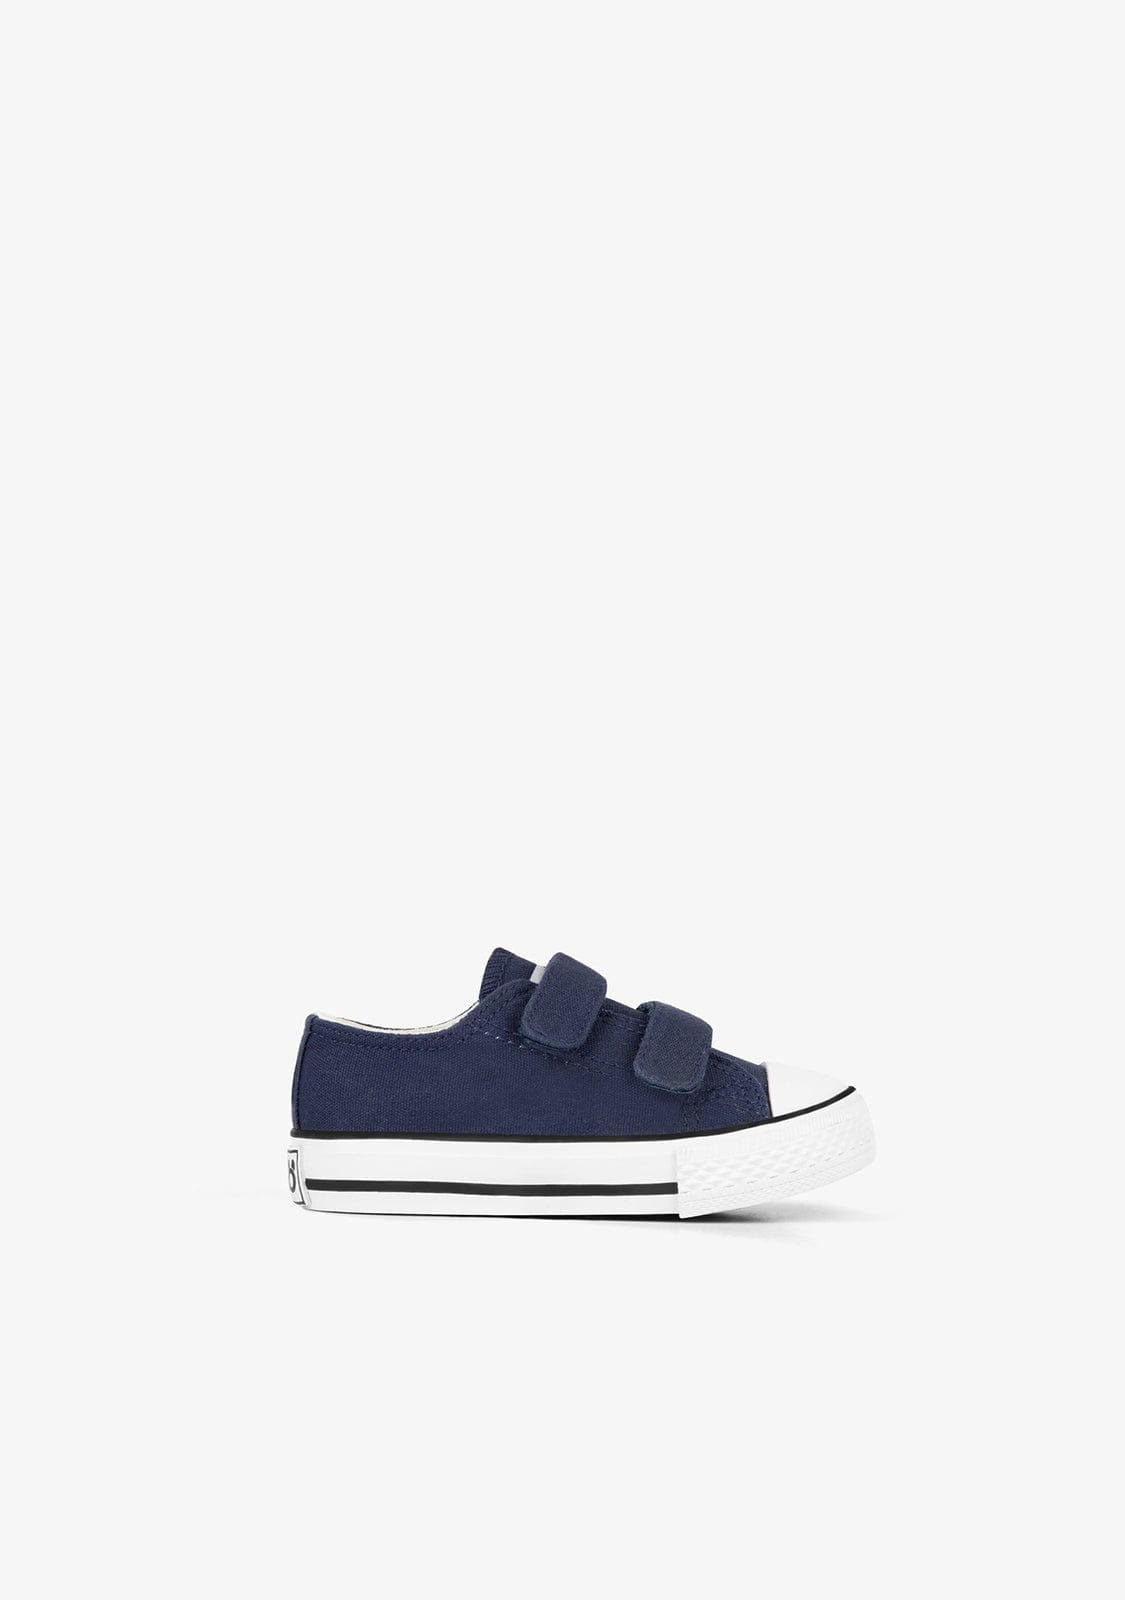 OSITO Shoes Baby's Navy Adherent Strips Sneakers Canvas